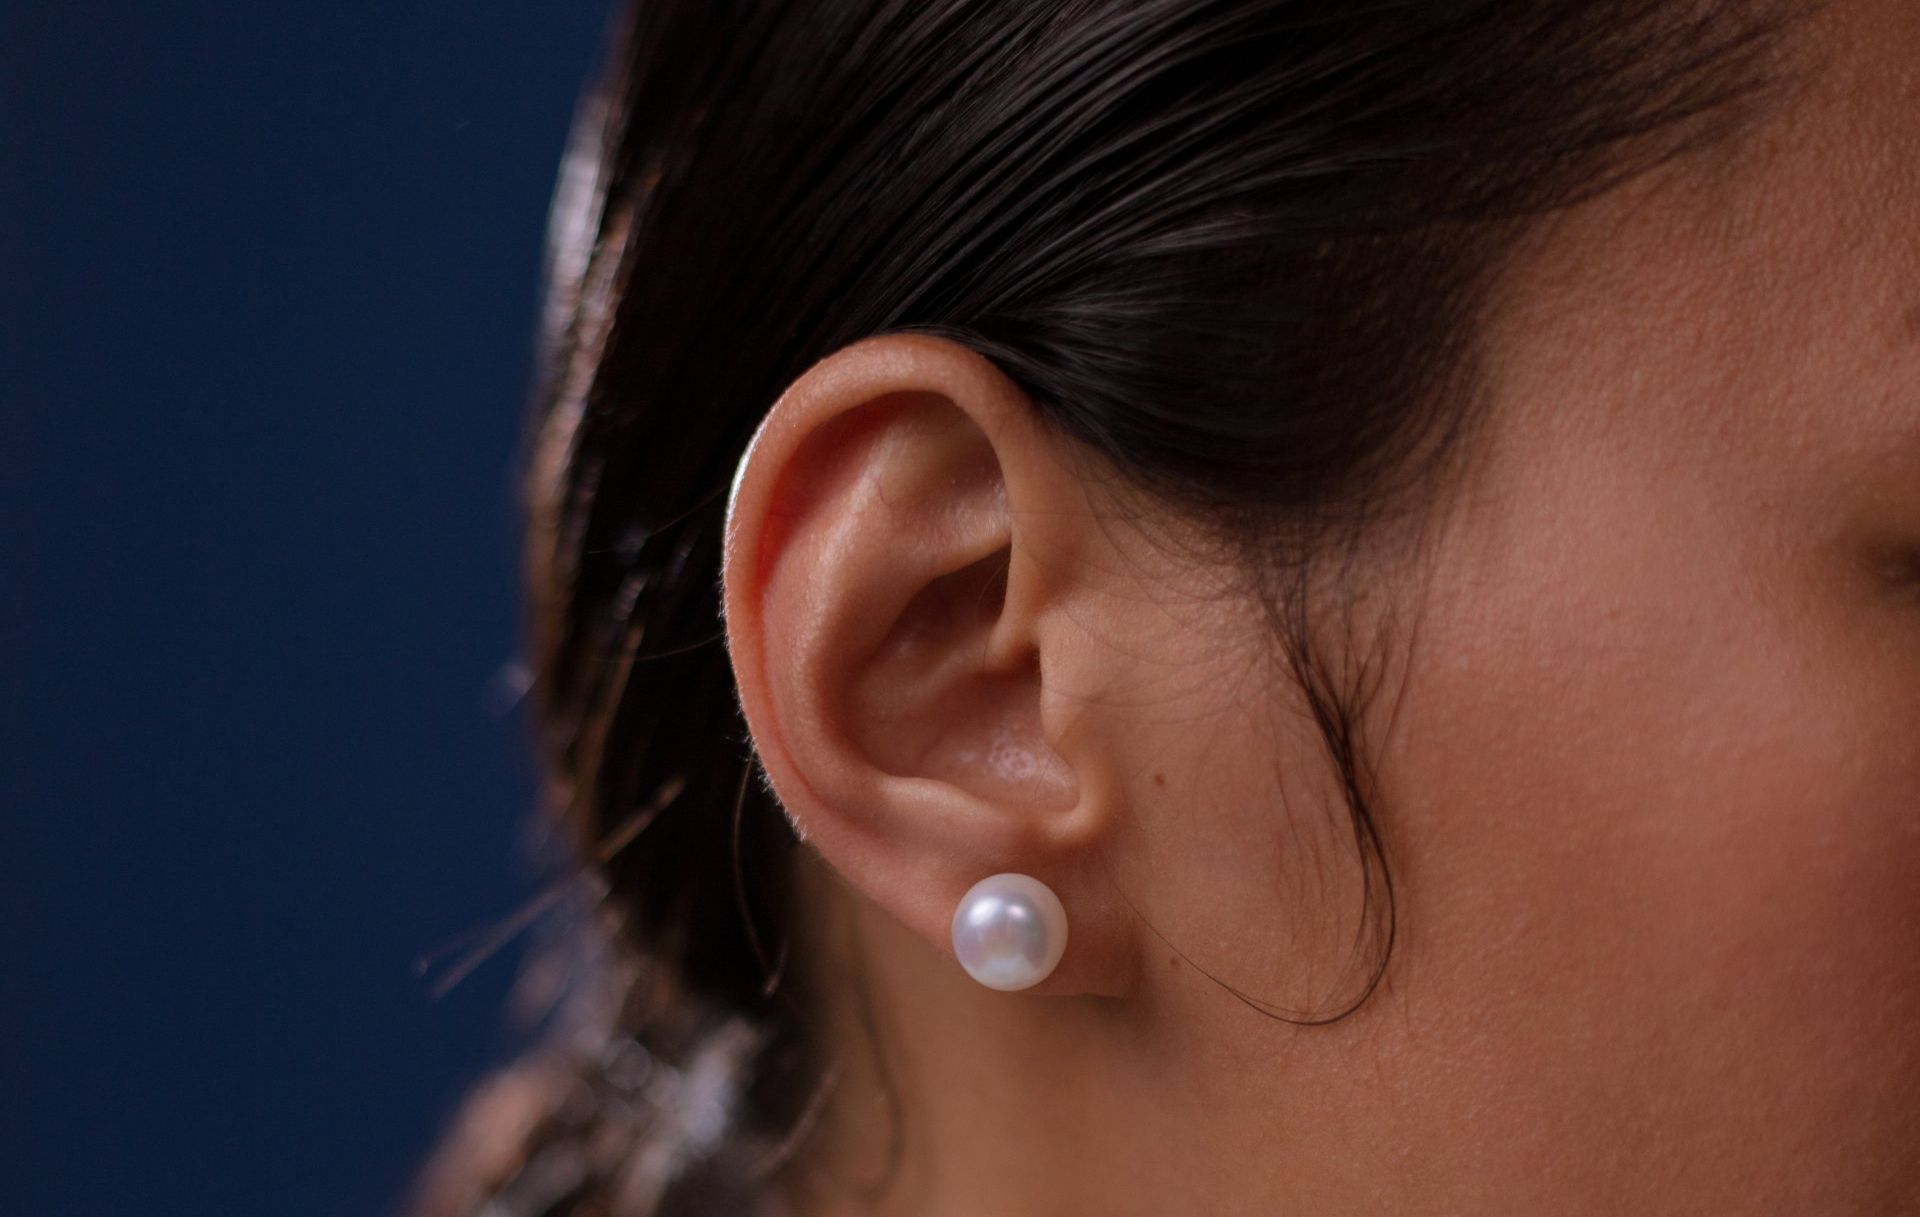 A persons ear with pearl earrings